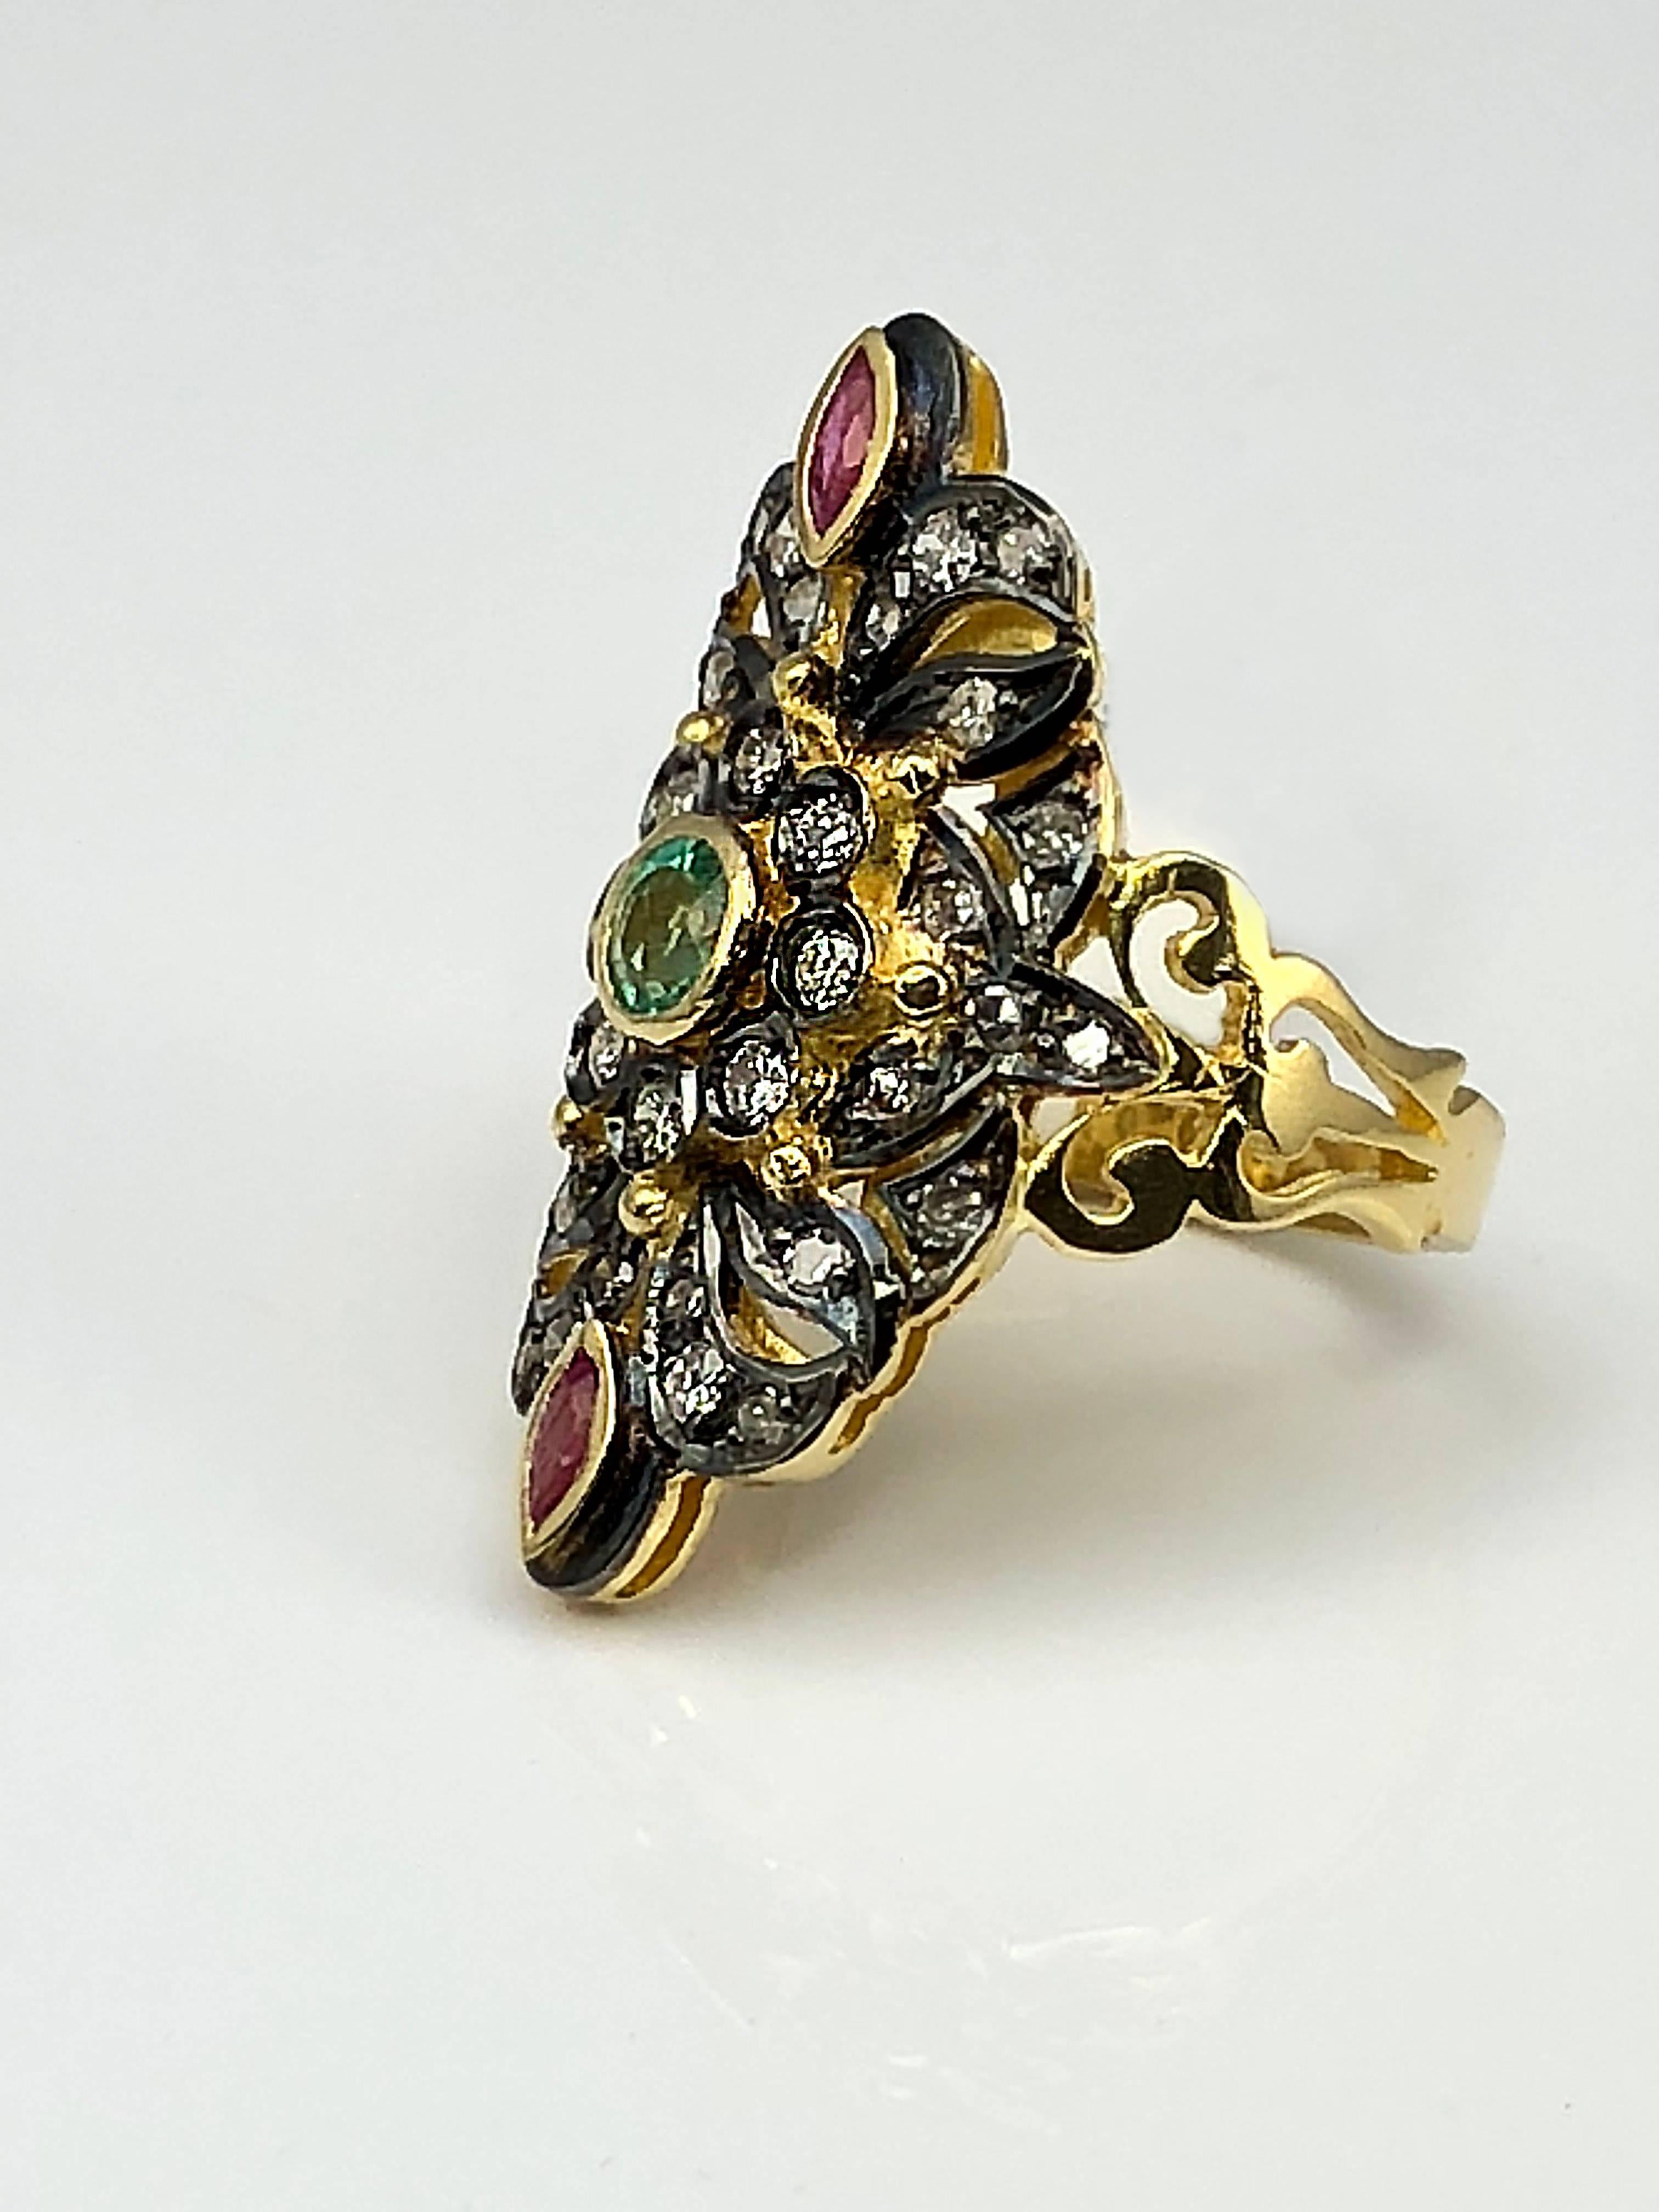 S.Georgios Designer all Hand Made 18 Karat Yellow Gold Ring decorated with Byzantine-era style granulation and a combination of Diamonds, Rubies, and Emerald. The stunning ring is richly decorated and the Black Rhodium areas give it its unique look.